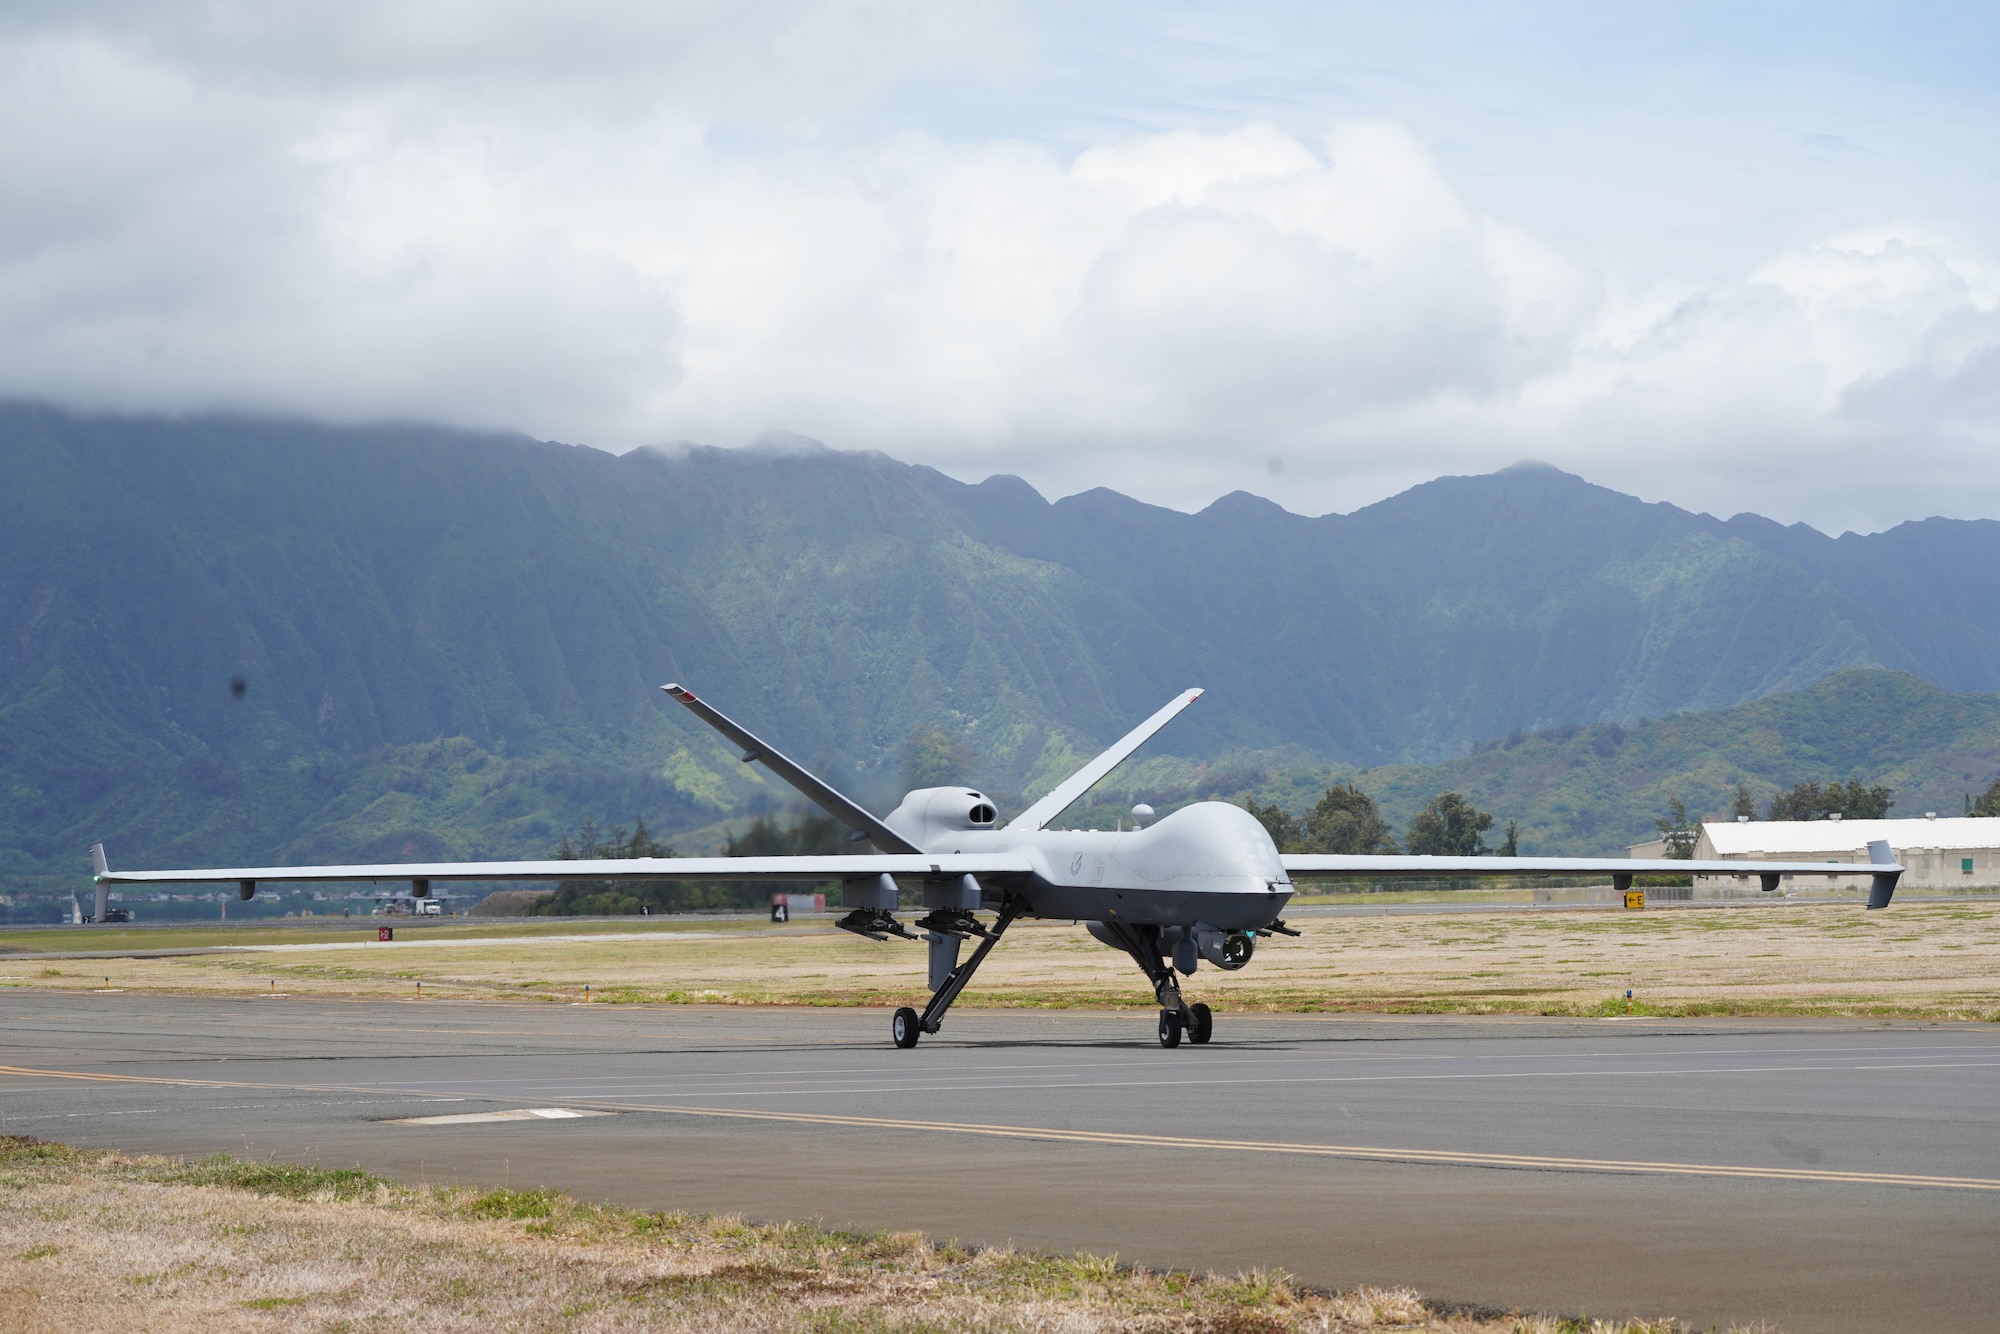 220706-F-IU083-1223 KANEOHE BAY, Hawaii (July 6, 2022) - A U.S. Air Force MQ-9 Reaper assigned to the 49th Wing taxis down a runway at Marine Corps Air Station Kaneohe Bay, Hawaii, during Rim of the Pacific (RIMPAC) 2022. Unmanned and remotely operated vessels extend the capability of interconnected manned platform sensors to enhance the warfighting capacity of multinational joint task forces. Twenty-six nations, 38 ships, four submarines, more than 170 aircraft and 25,000 personnel are participating in RIMPAC from June 29 to Aug. 4 in and around the Hawaiian Islands and Southern California. The world's largest international maritime exercise, RIMPAC provides a unique training opportunity while fostering and sustaining cooperative relationships among participants critical to ensuring the safety of sea lanes and security on the world's oceans. RIMPAC 2022 is the 28th exercise in the series that began in 1971. (U.S. Air Force photo by Airman 1st Class Ariel O'Shea)